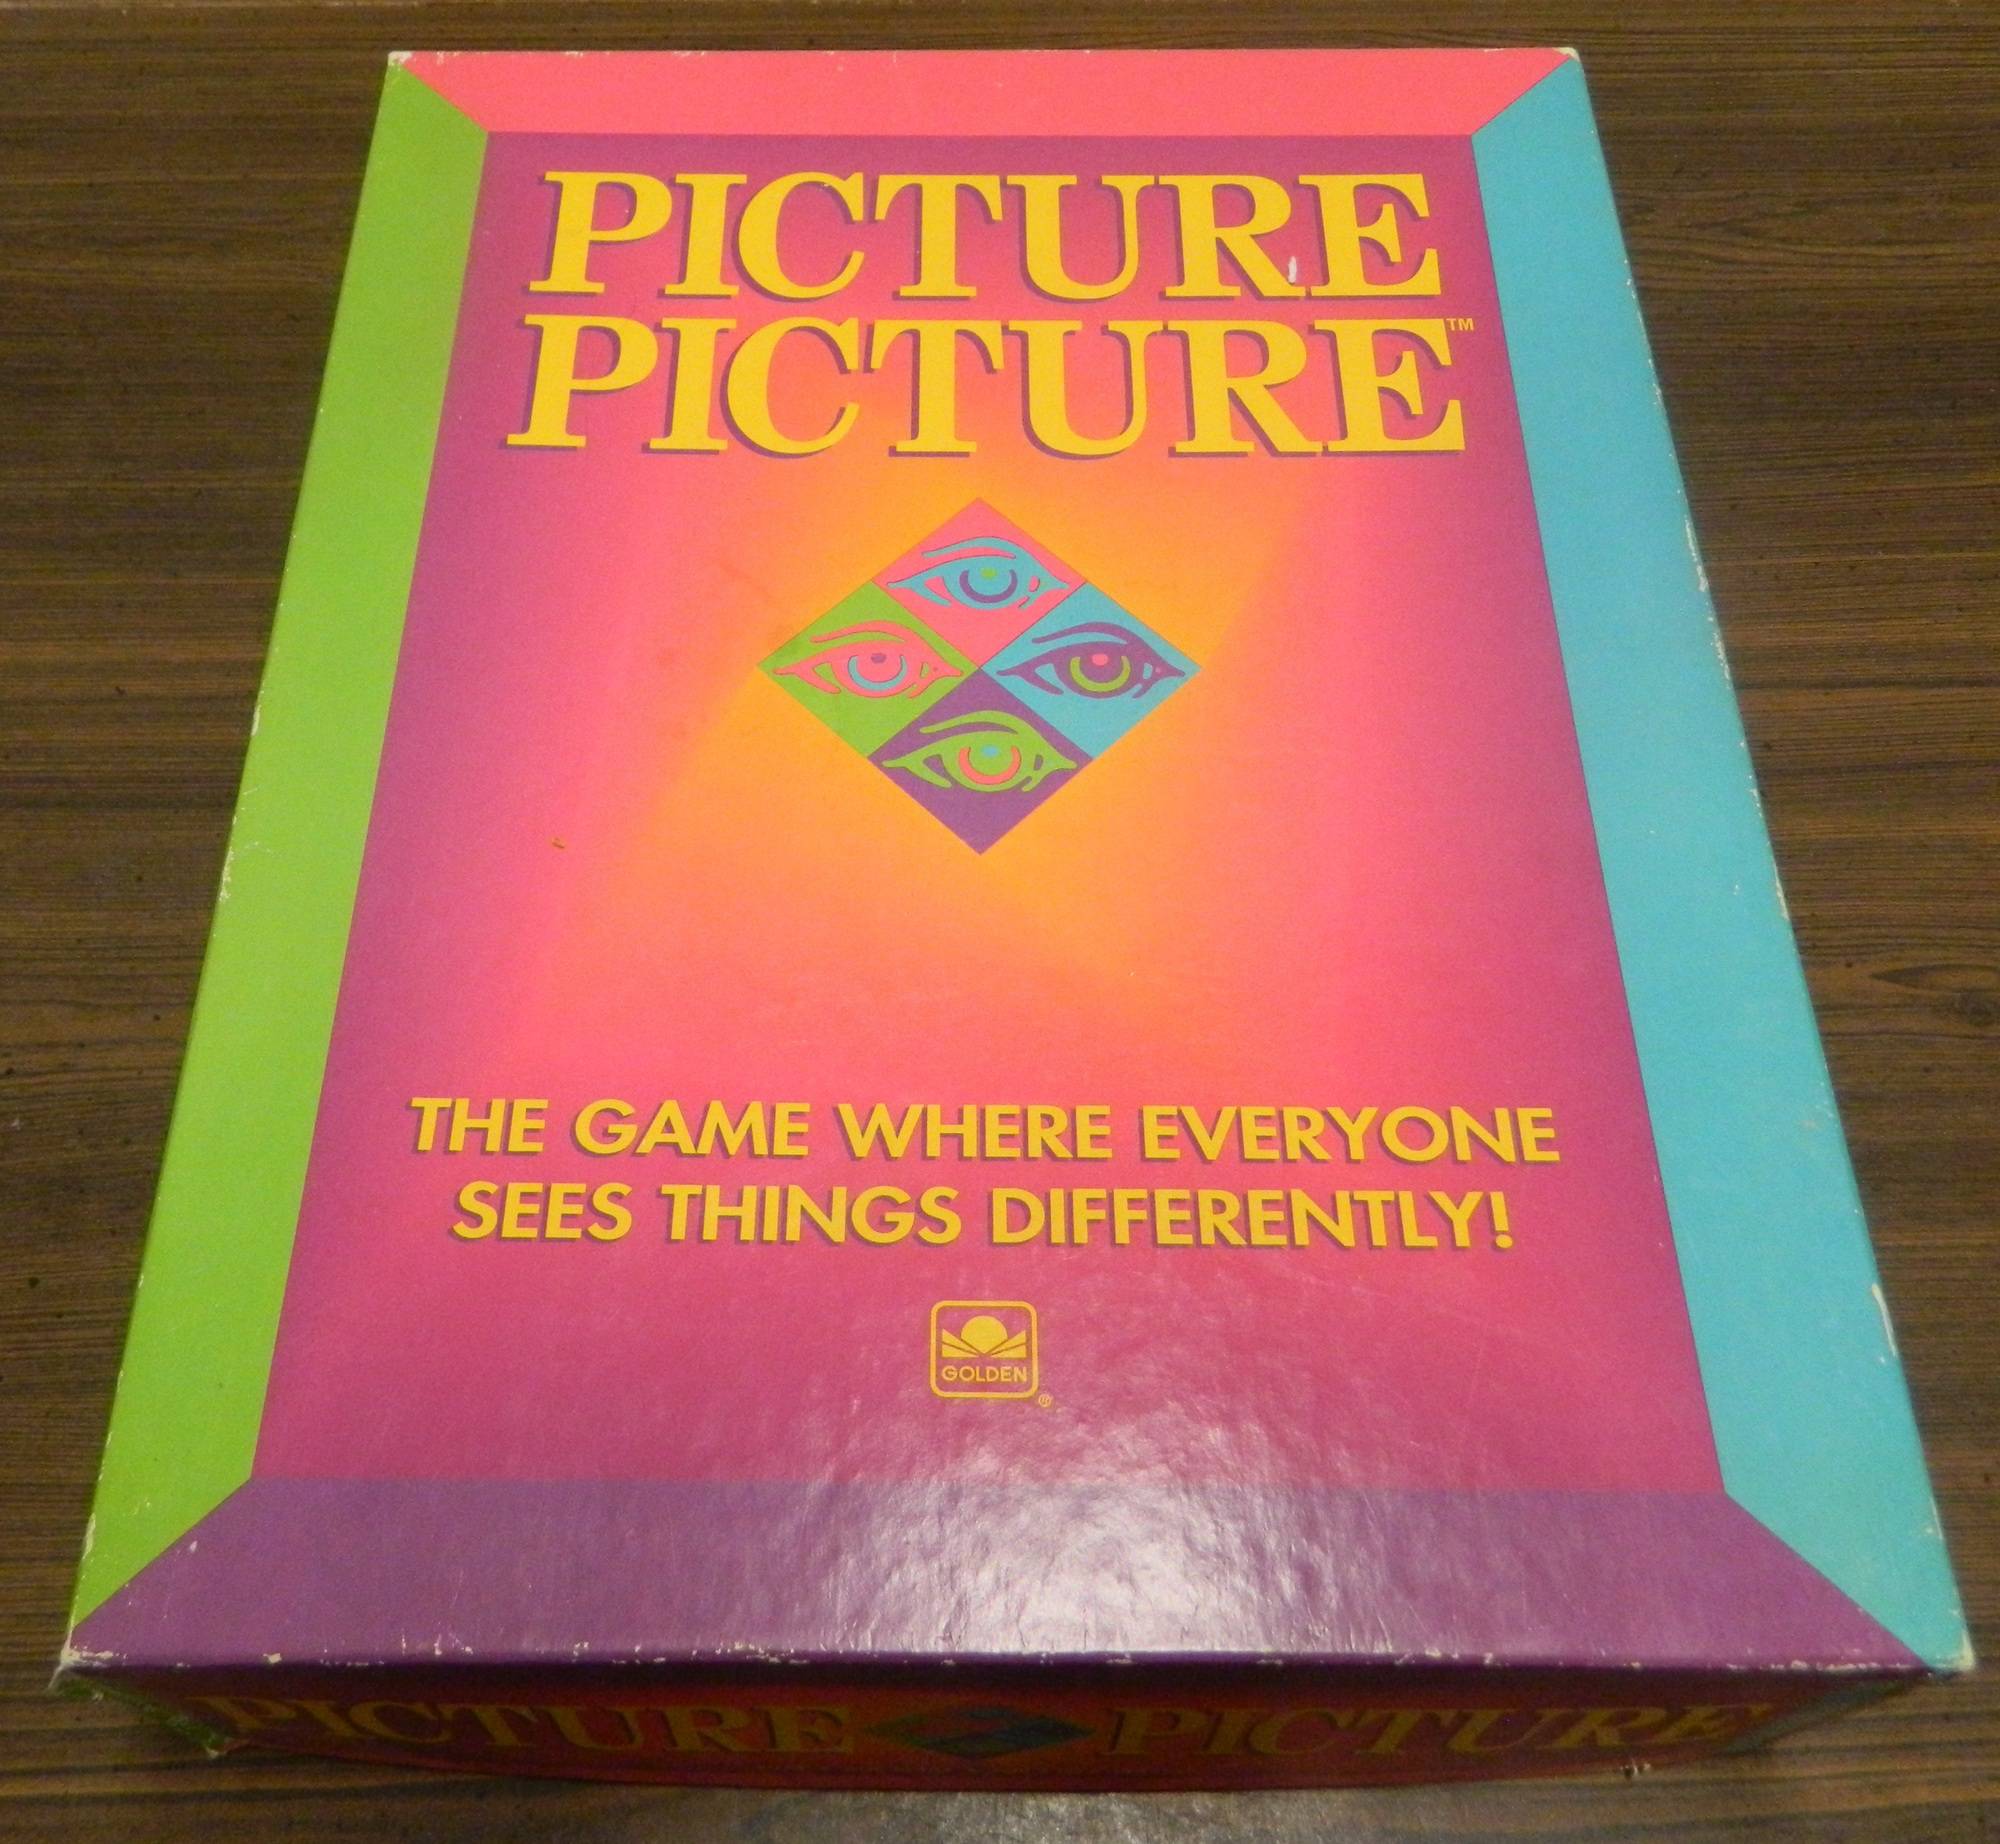 Box for Picture Picture